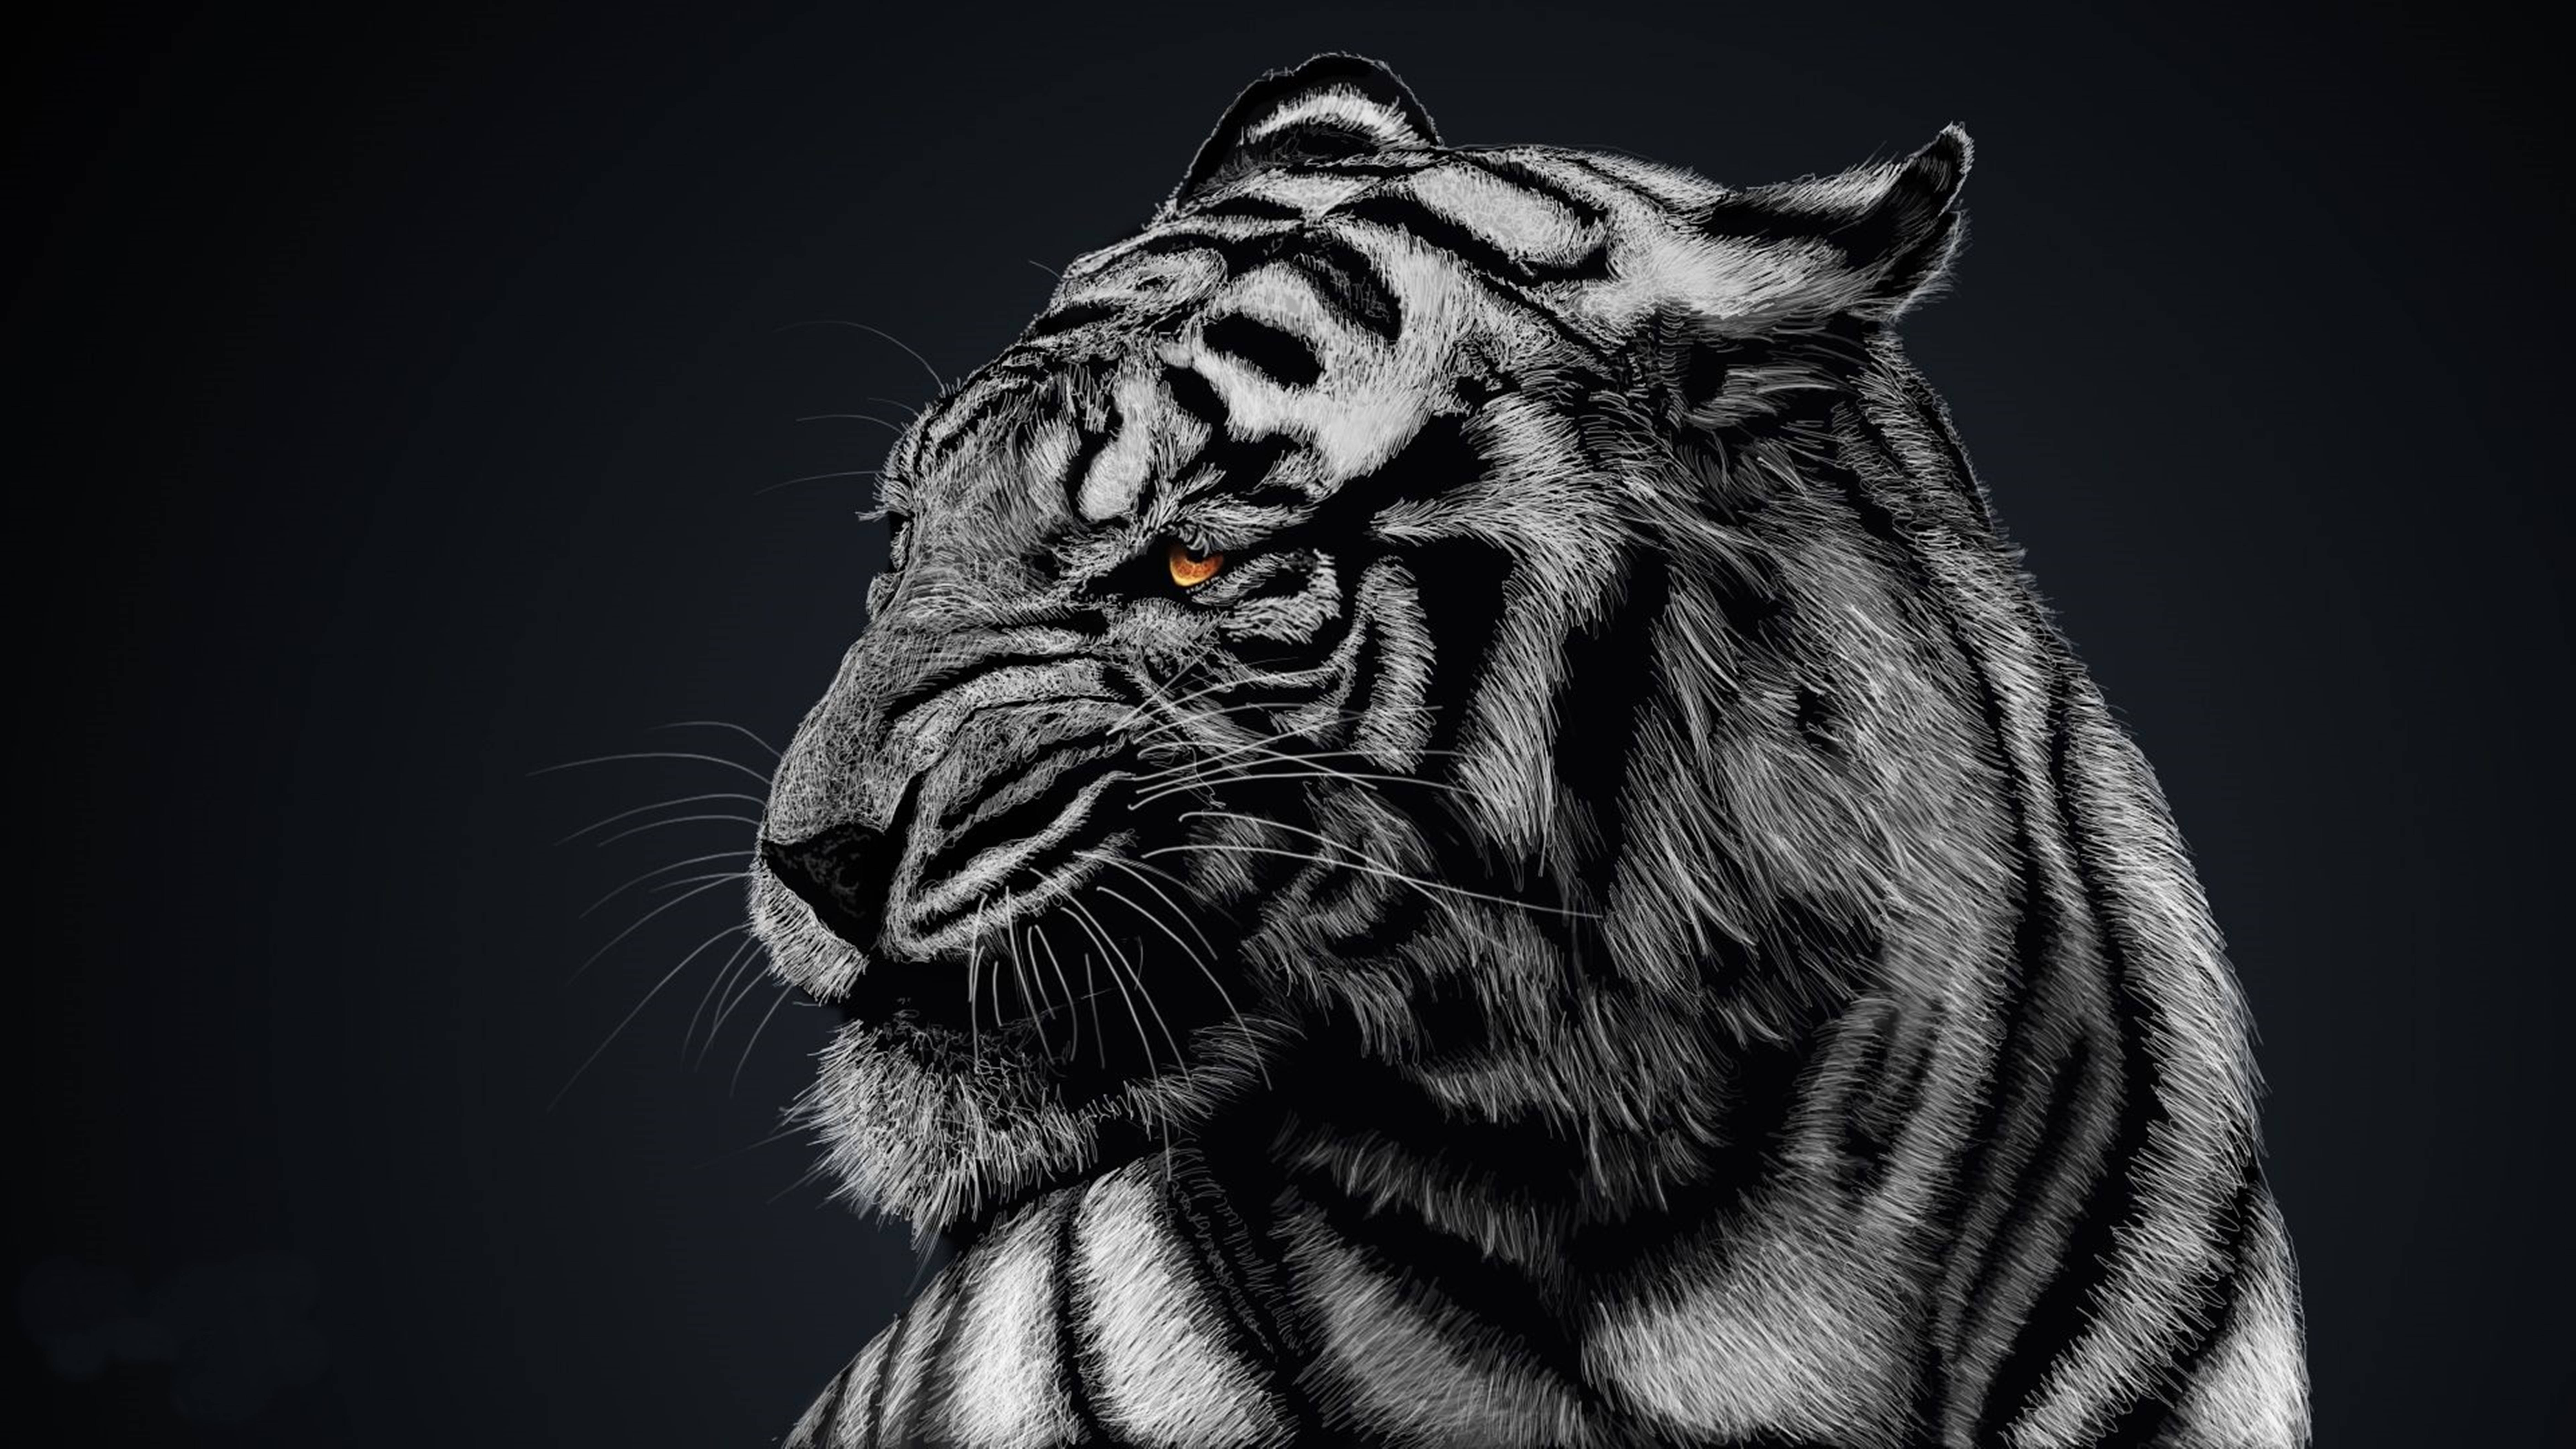 Majestic 8k Tiger In Ultra-high Definition